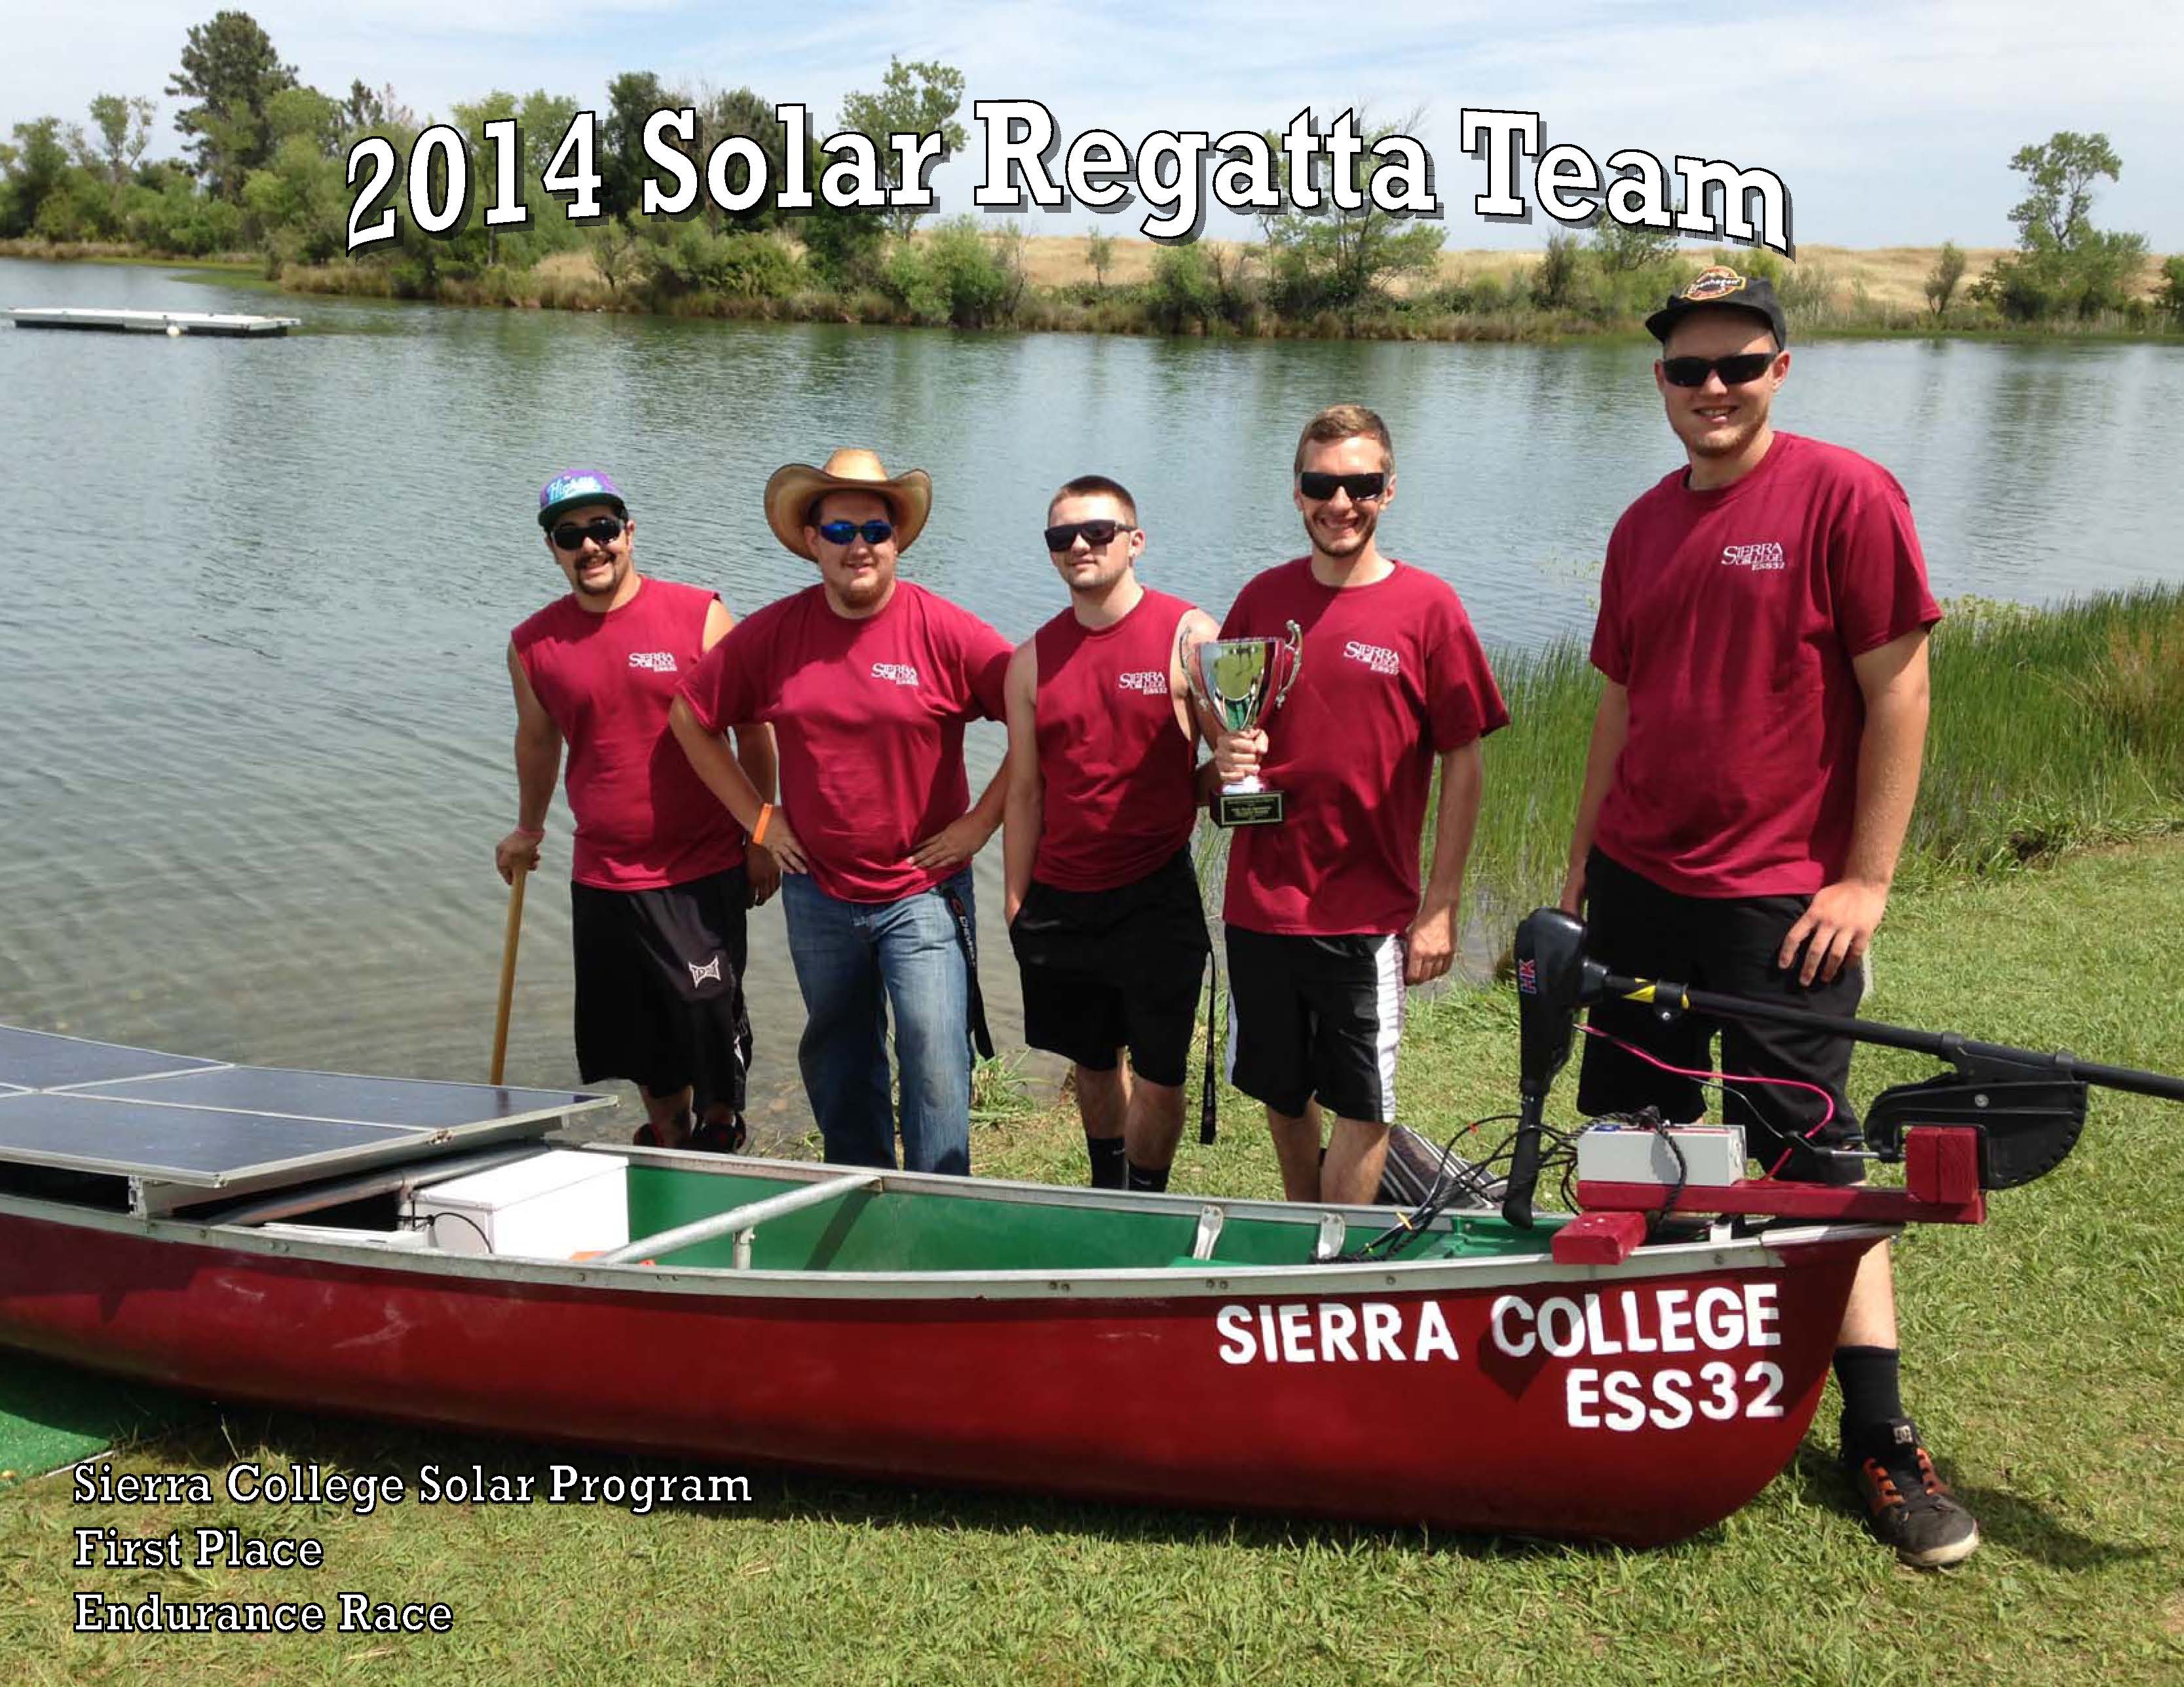 the Solar Energy Program team beat out 9 other college teams to win first place in the endurance race.